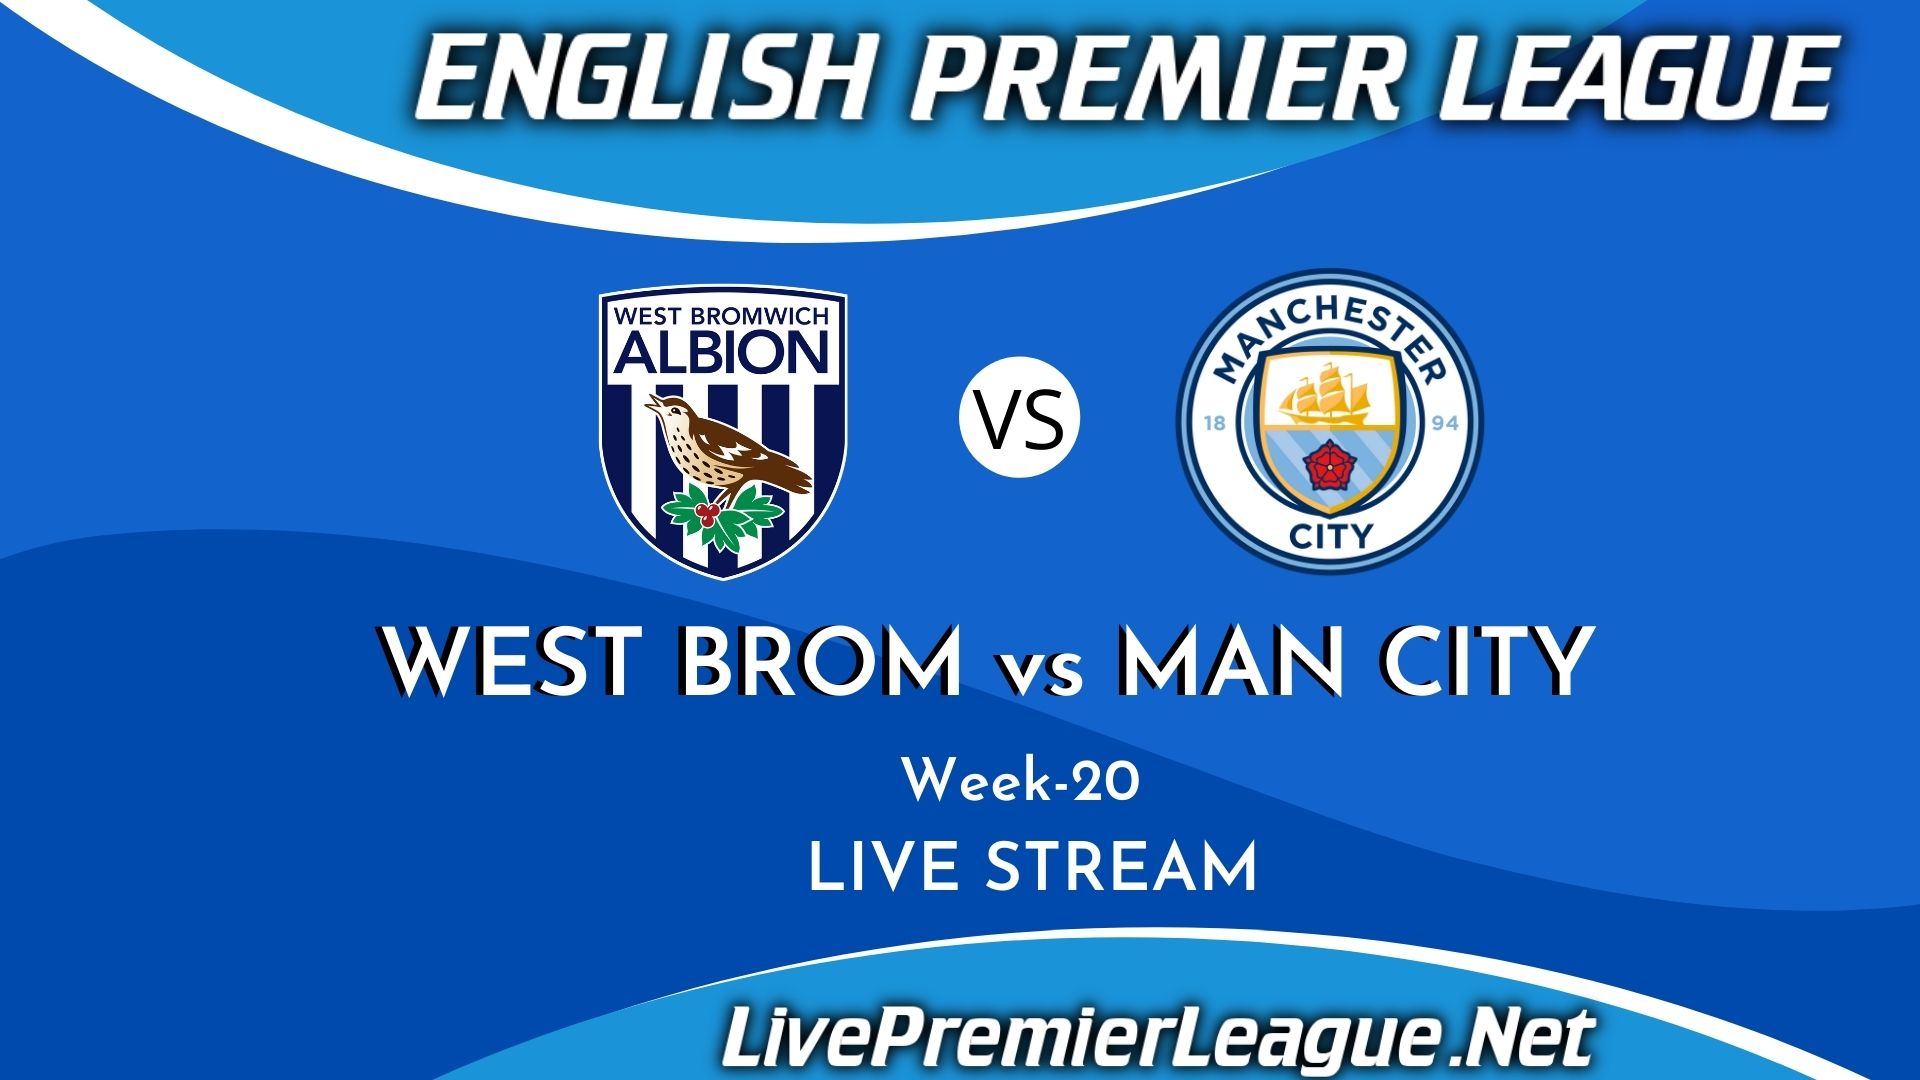 West Bromwich Albion Vs Manchester City Live Stream 2021 | Week 20